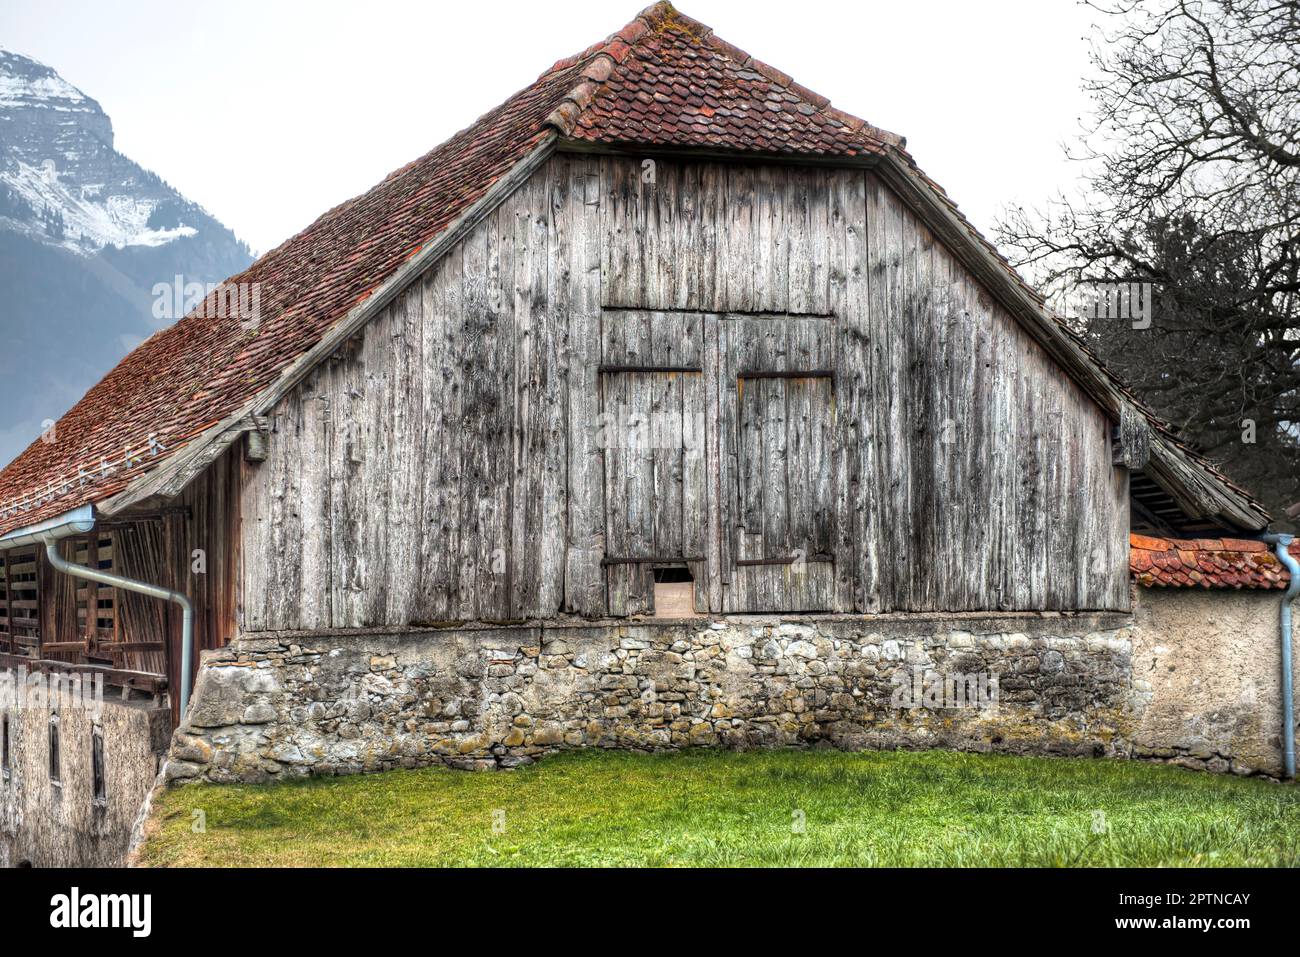 The facade of an old weathered wooden barn Stock Photo